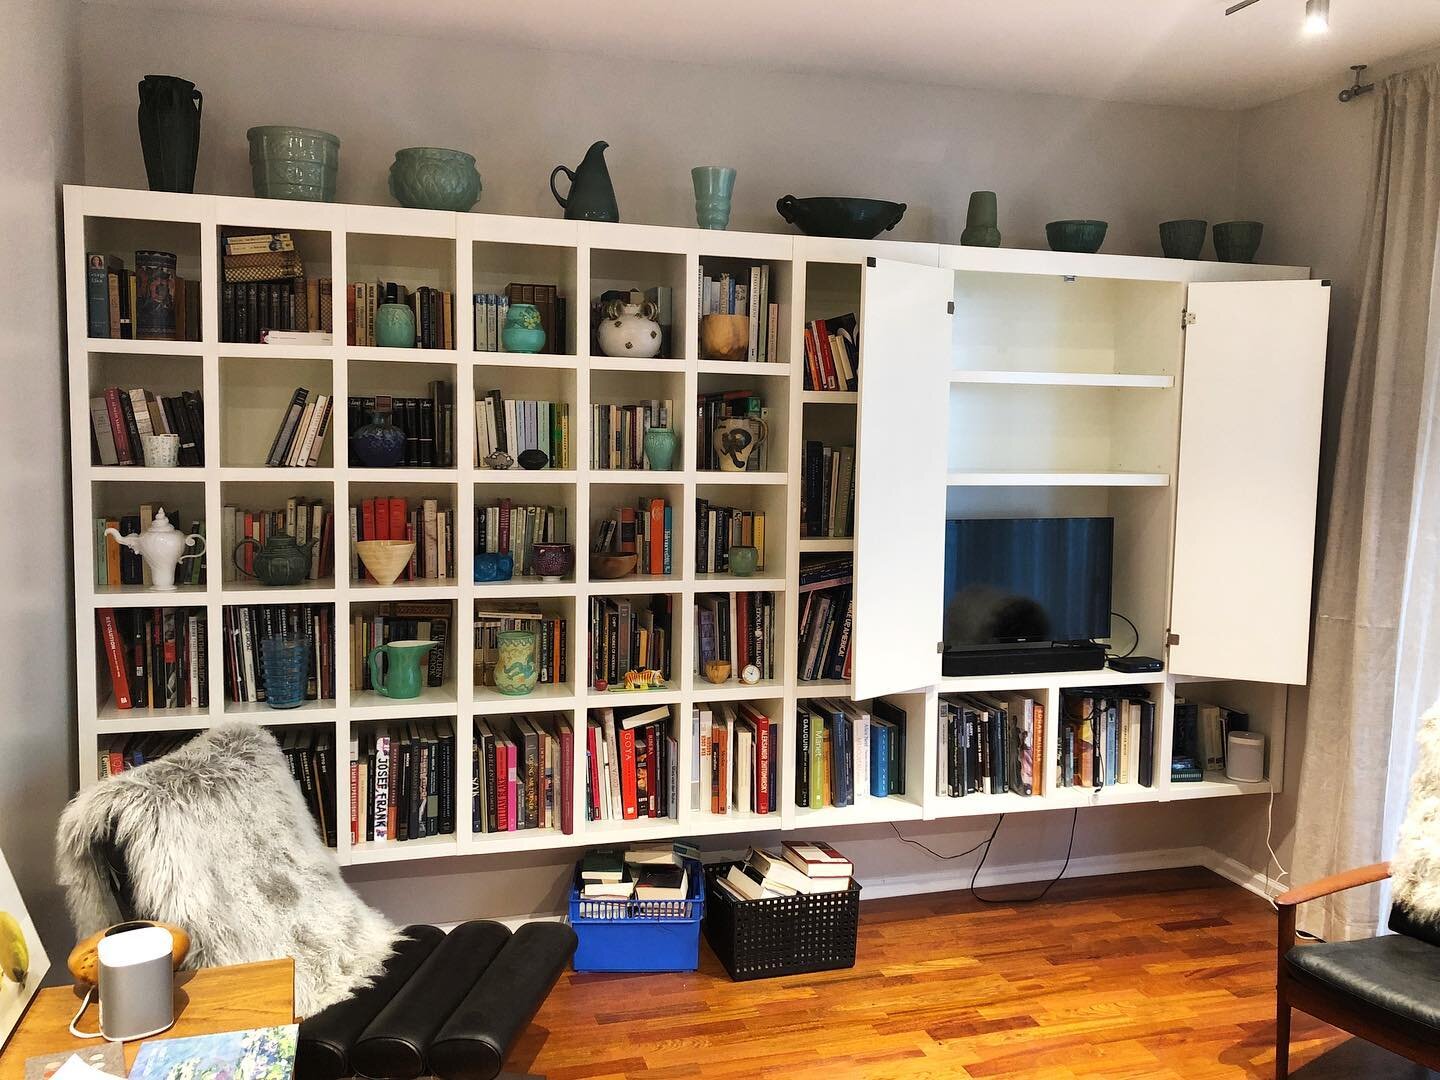 When you&rsquo;ve got cool stuff, you&rsquo;ve got to show it off. 

We&rsquo;re big fans of this floating bookcase with a hidden entertainment center that we created for this South Loop condo. It takes up minimal space but adds oh-so-much storage an